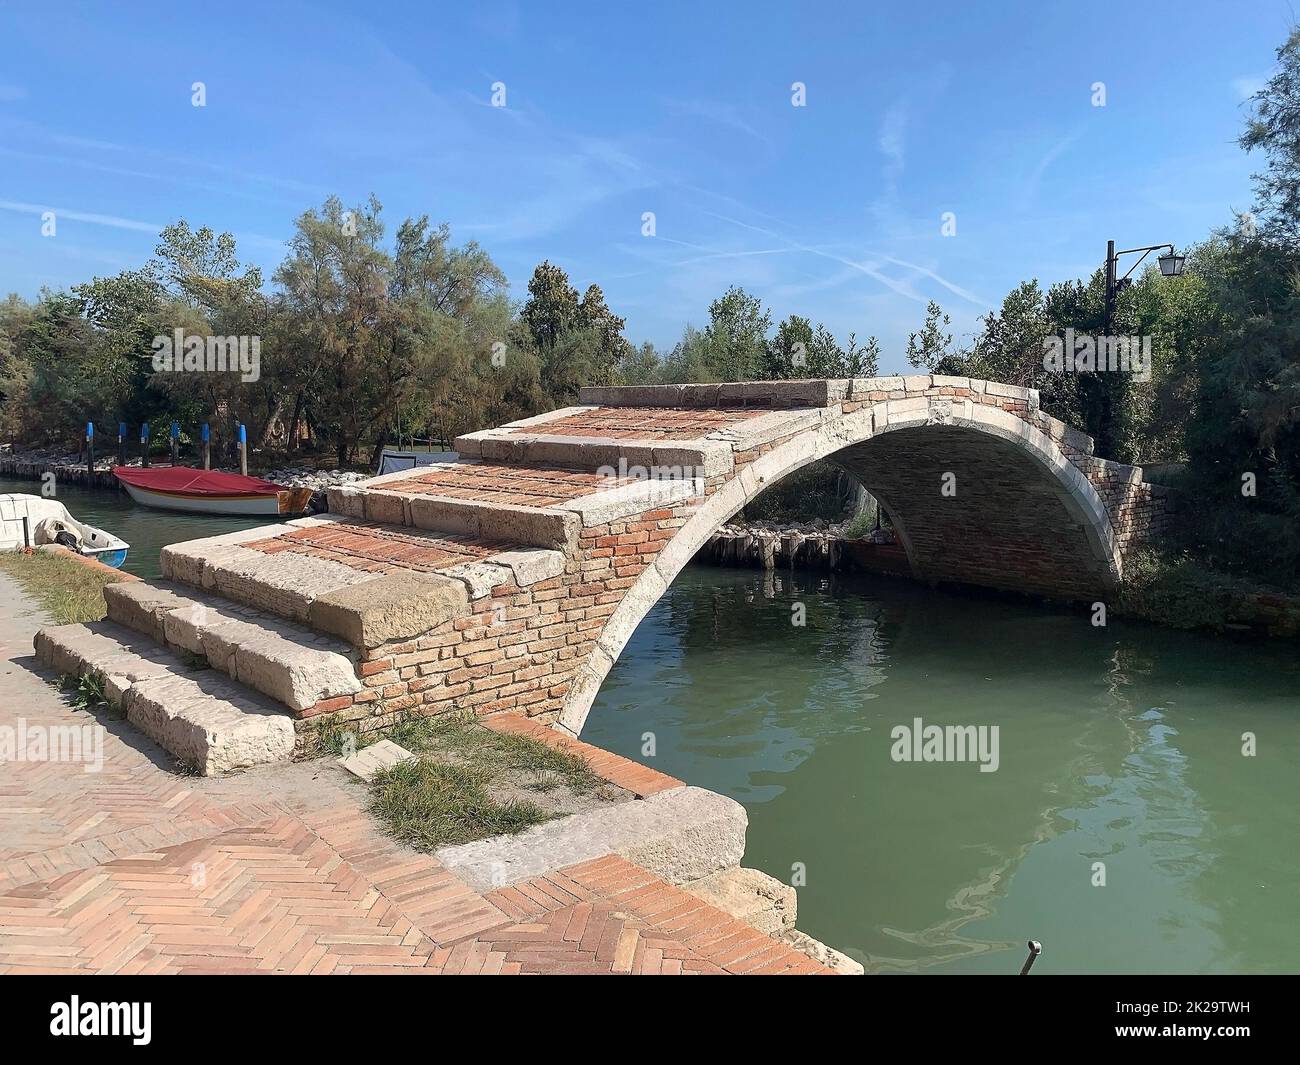 Devils's Bridge at Torcello island at the northern end of Venetian lagoon, Venice, Italy Stock Photo